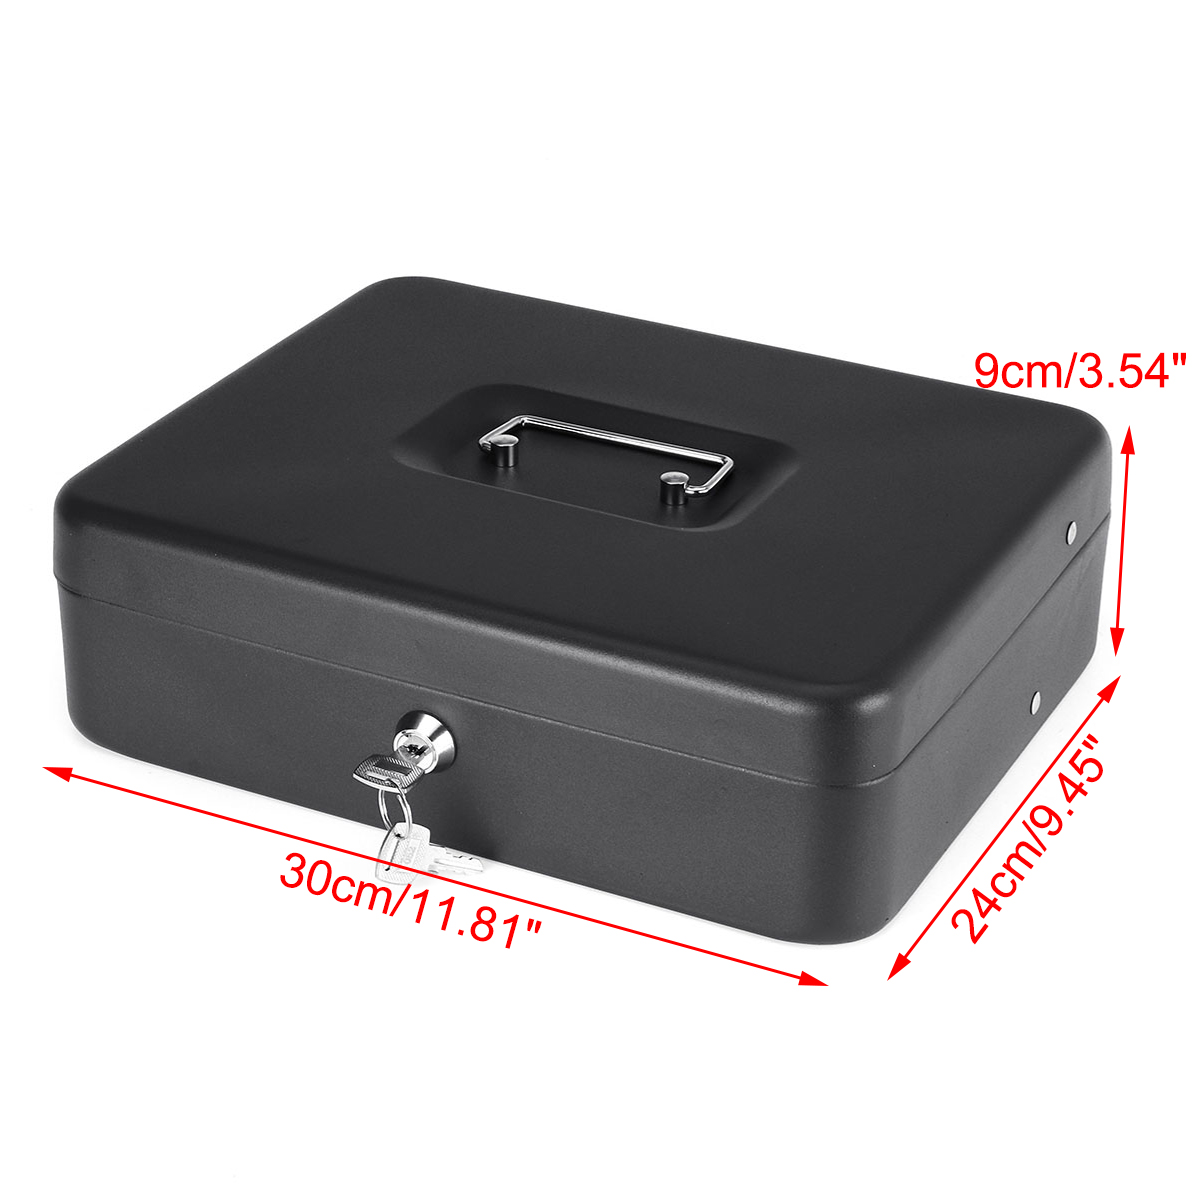 4-Bill-5-Coin-Cash-Drawer-Tray-Storage-Box-for-Cashier-Money-Security-Lock-Safe-Box-1457105-1